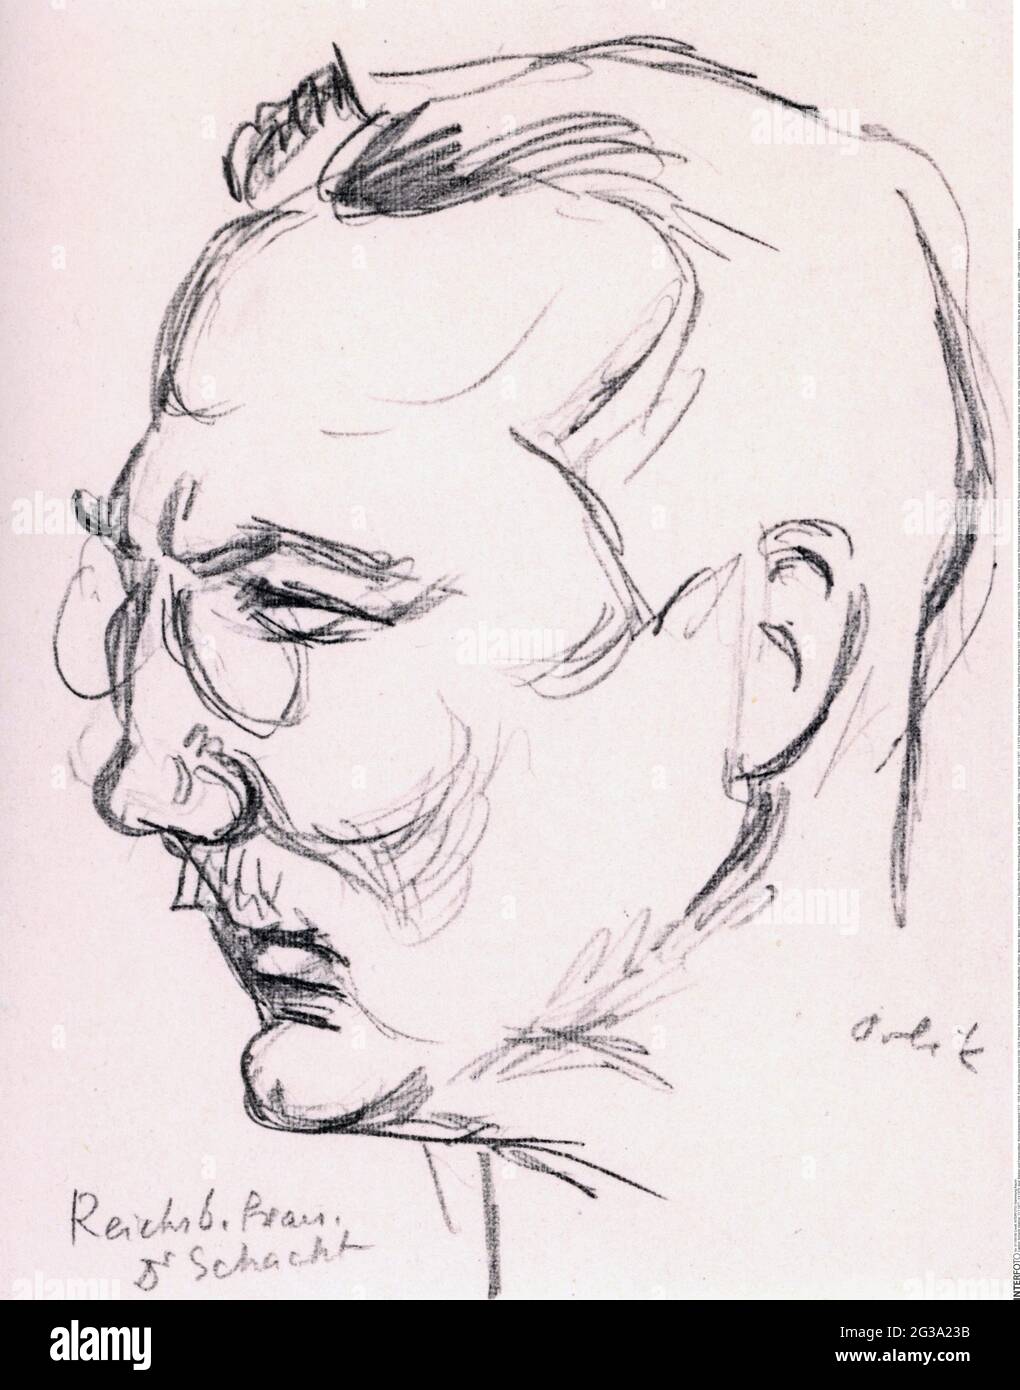 Schacht, Hjalmar, 22.1.1877 - 3.6.1970, German banker and fiscal politician, ARTIST'S COPYRIGHT HAS NOT TO BE CLEARED Stock Photo